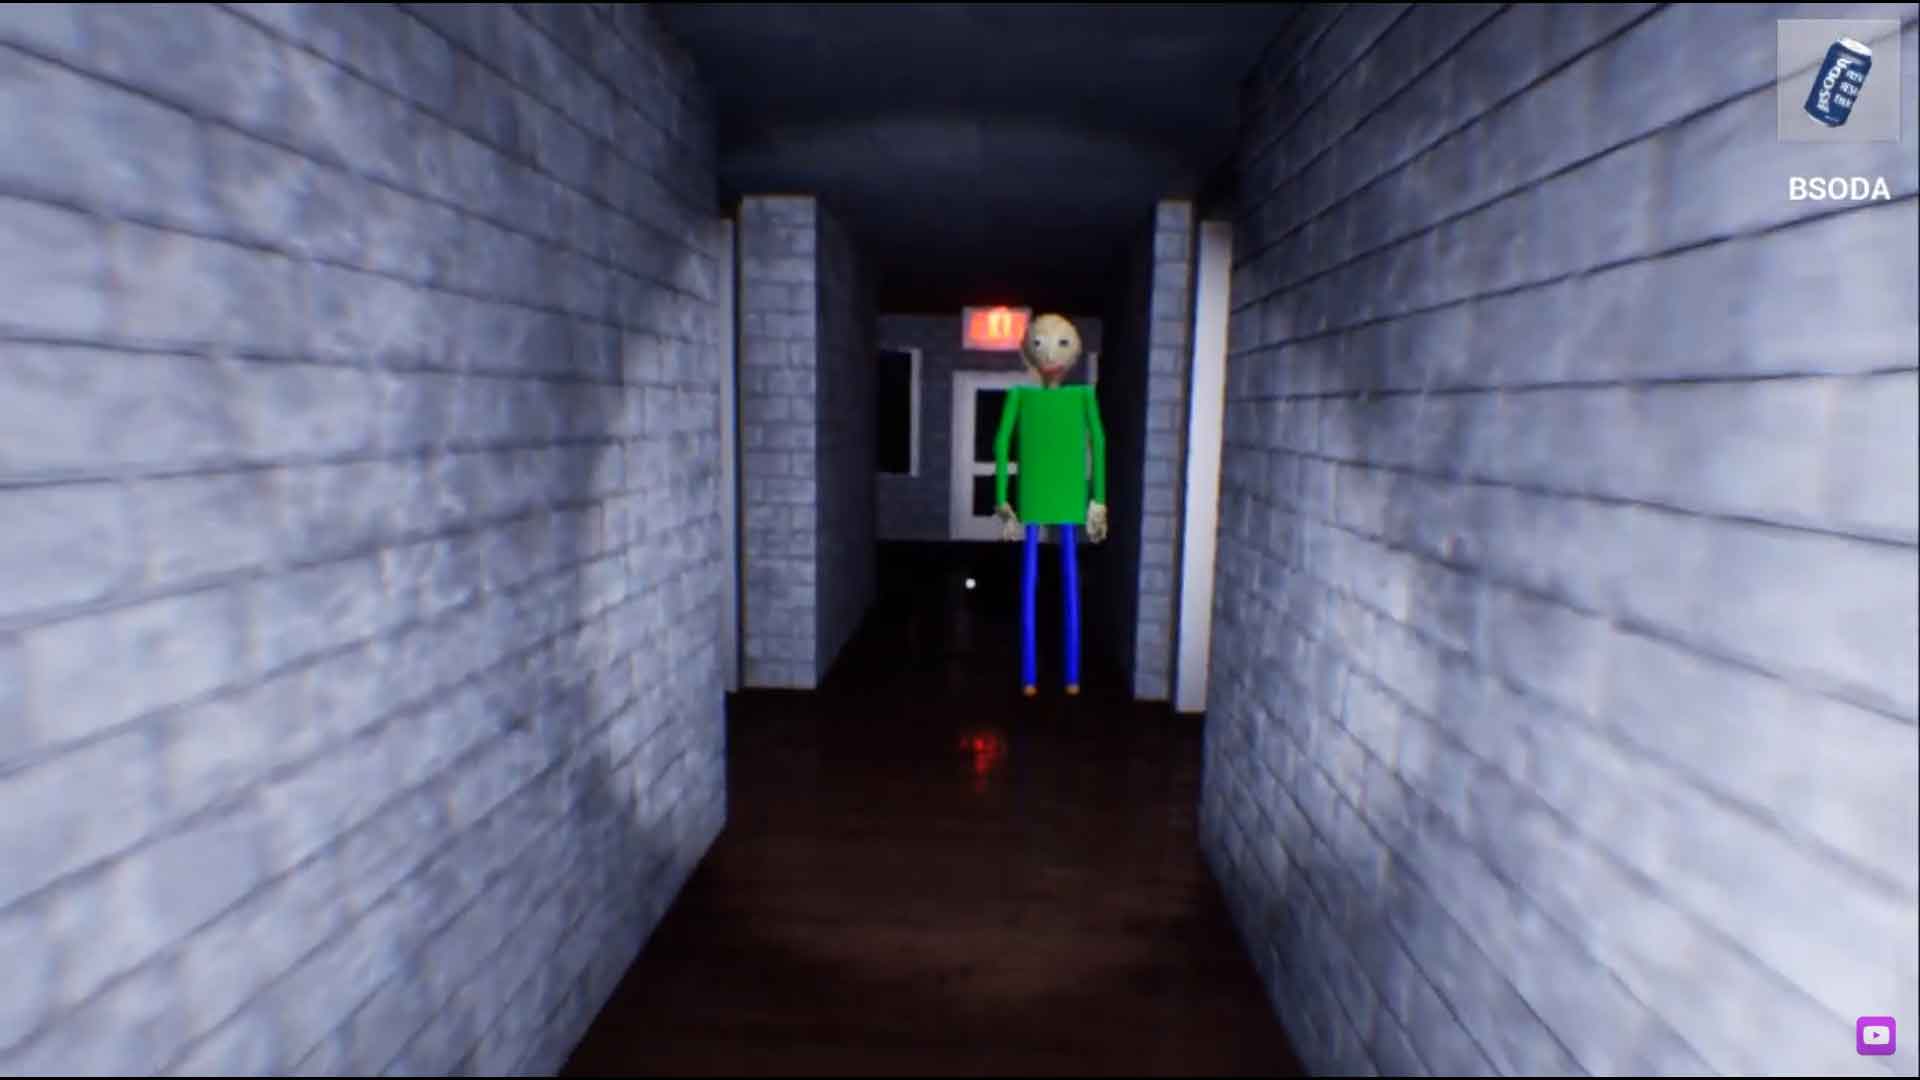 baldi basics in education and learning download free